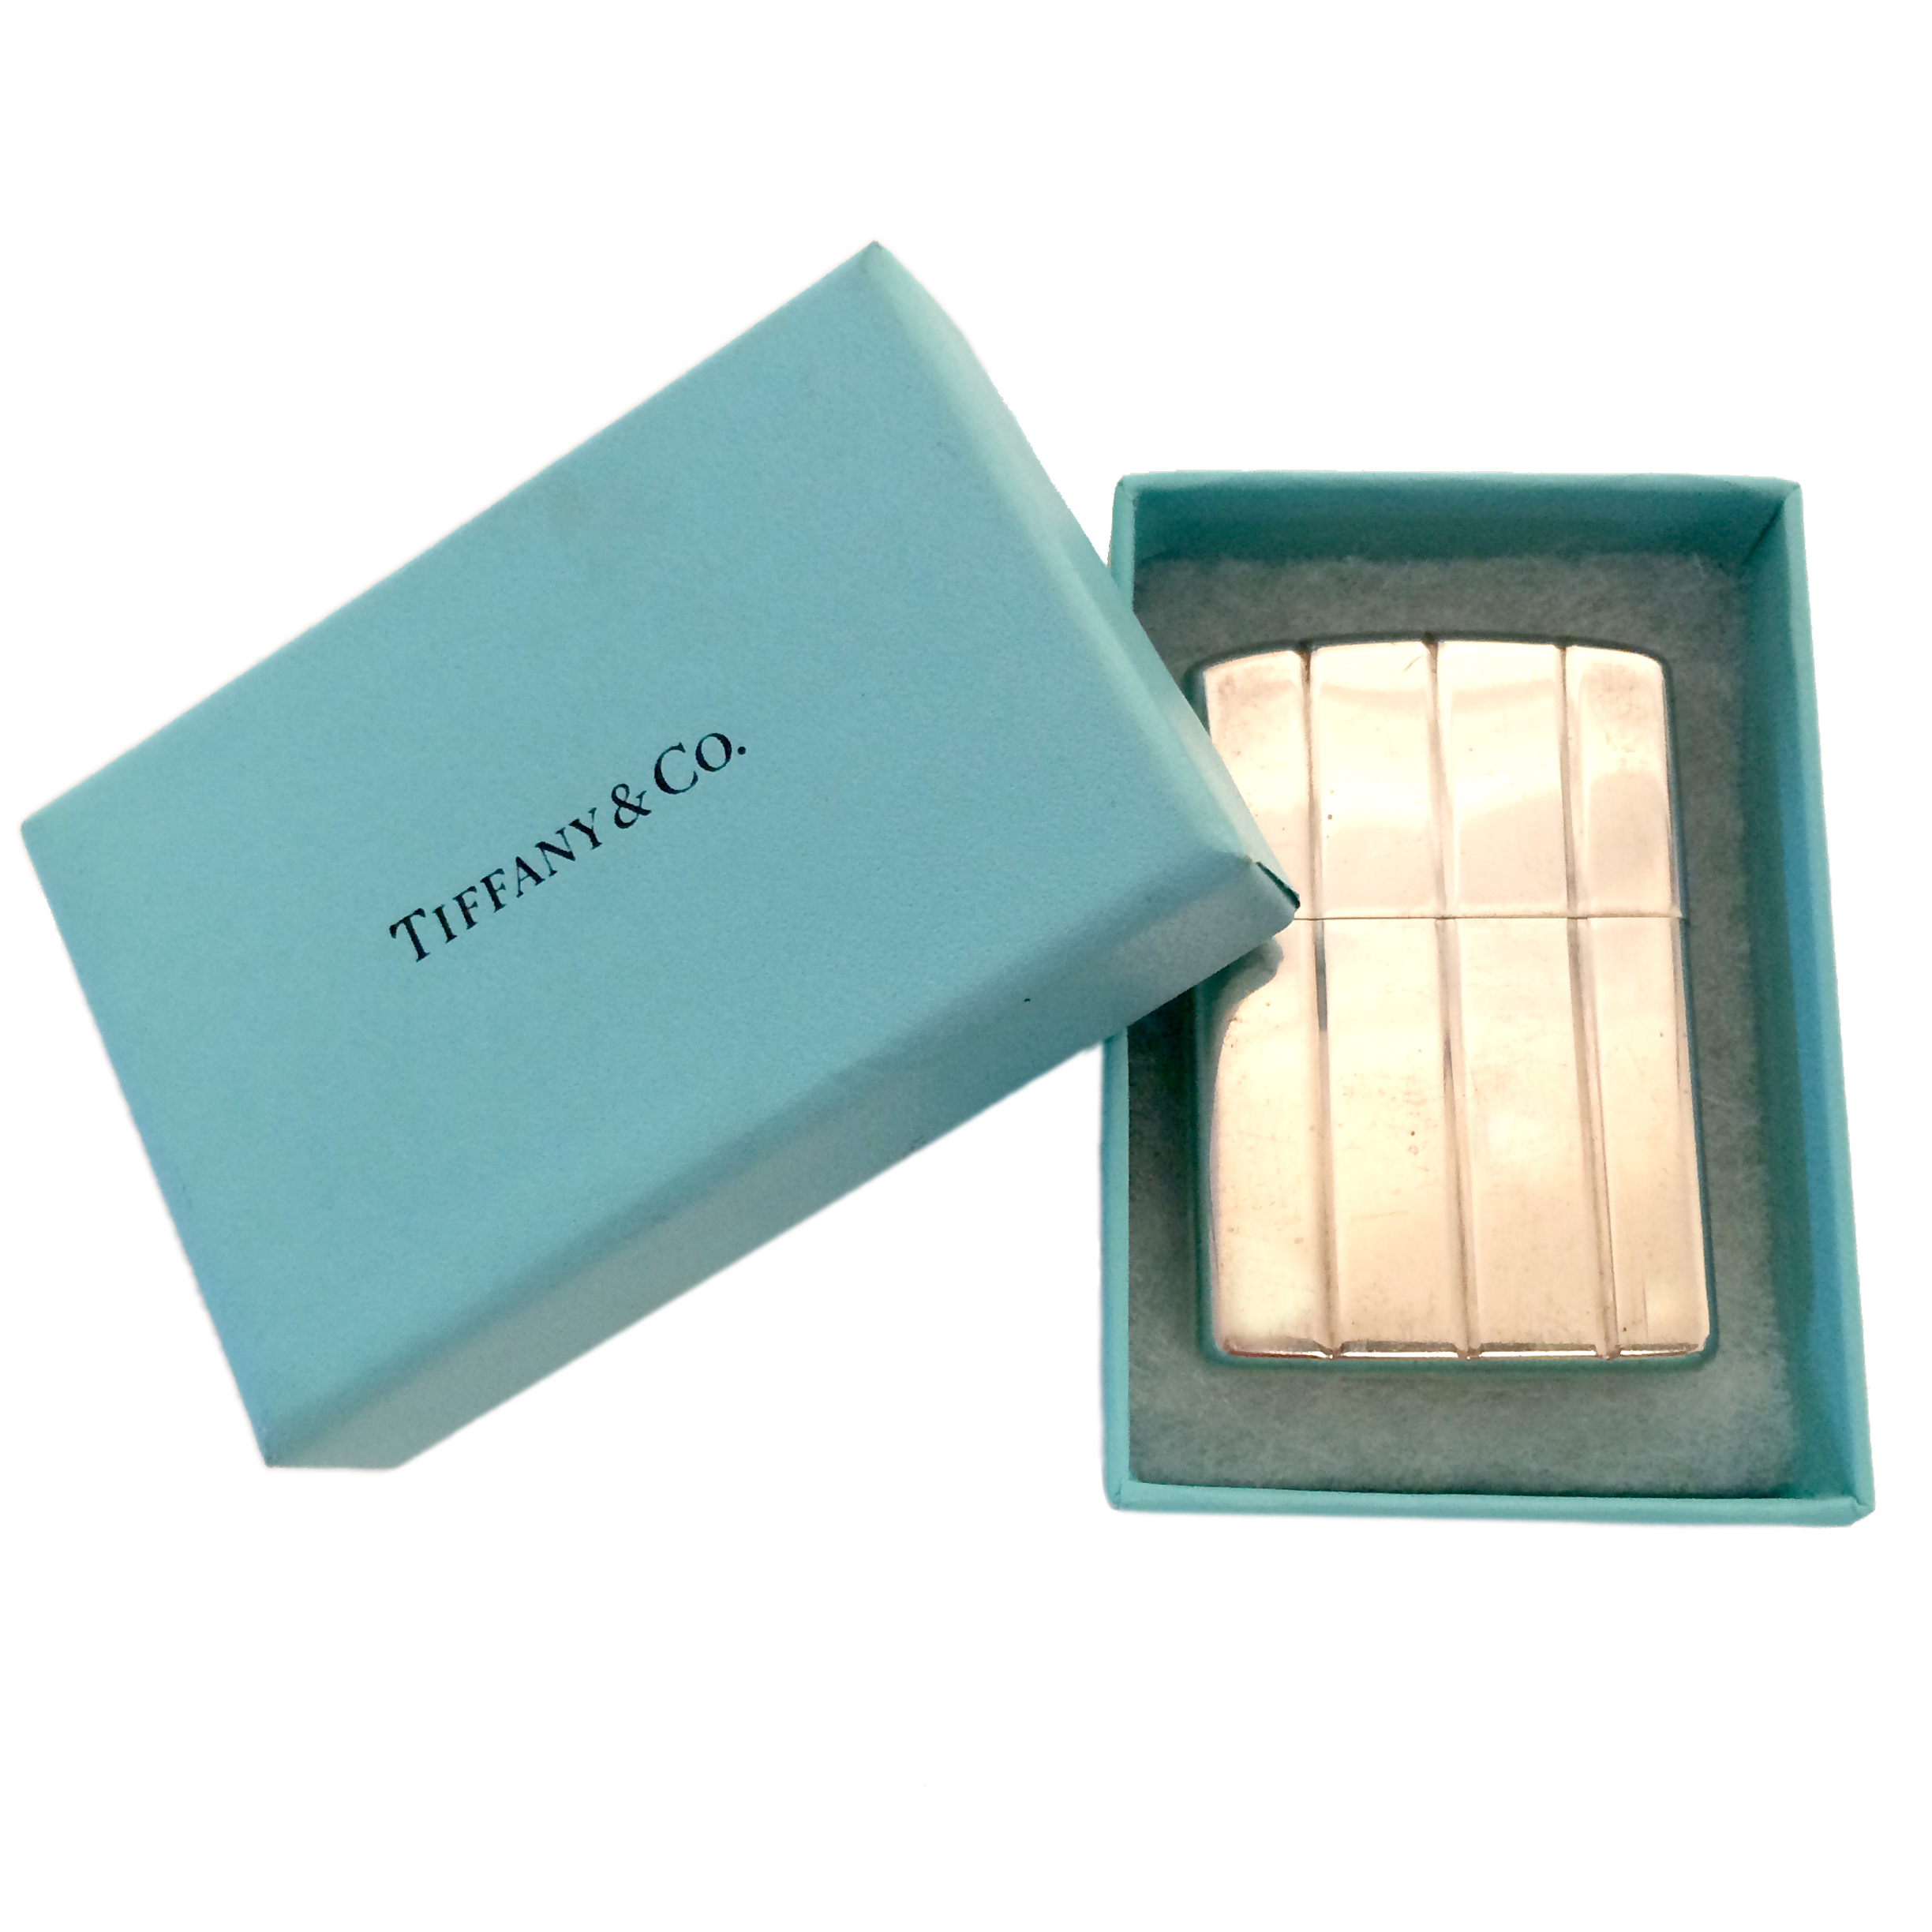 tiffany and co lighter